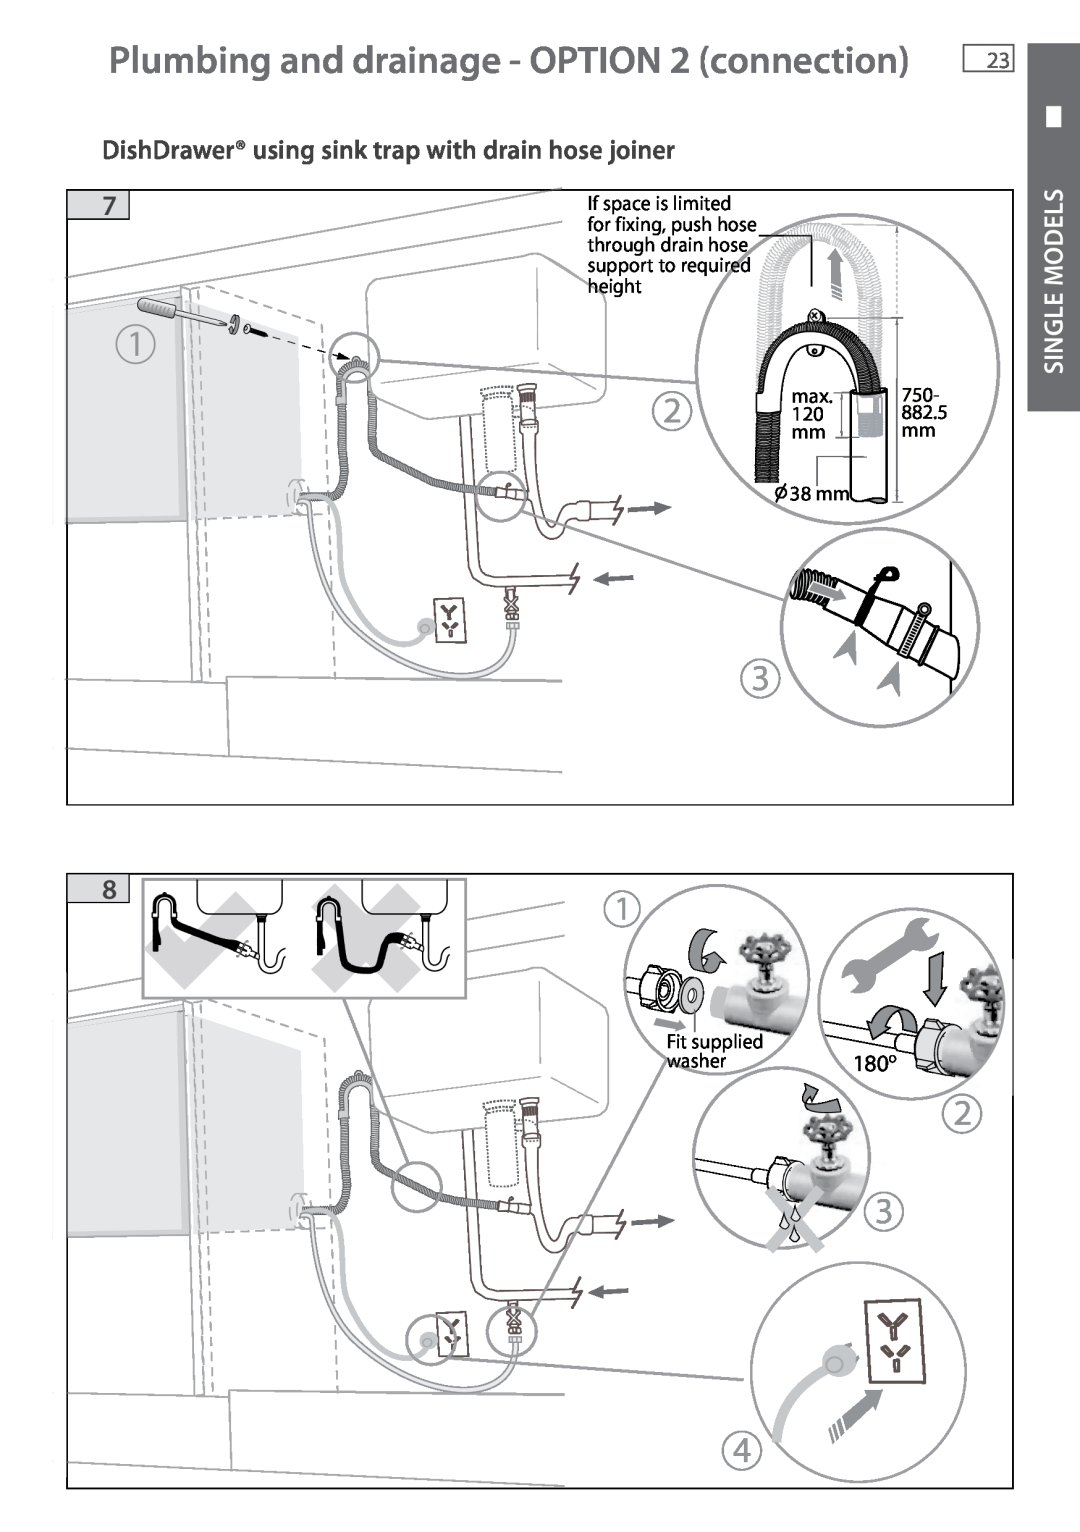 Fisher & Paykel DD605 Plumbing and drainage - OPTION 2 connection, DishDrawer using sink trap with drain hose joiner 